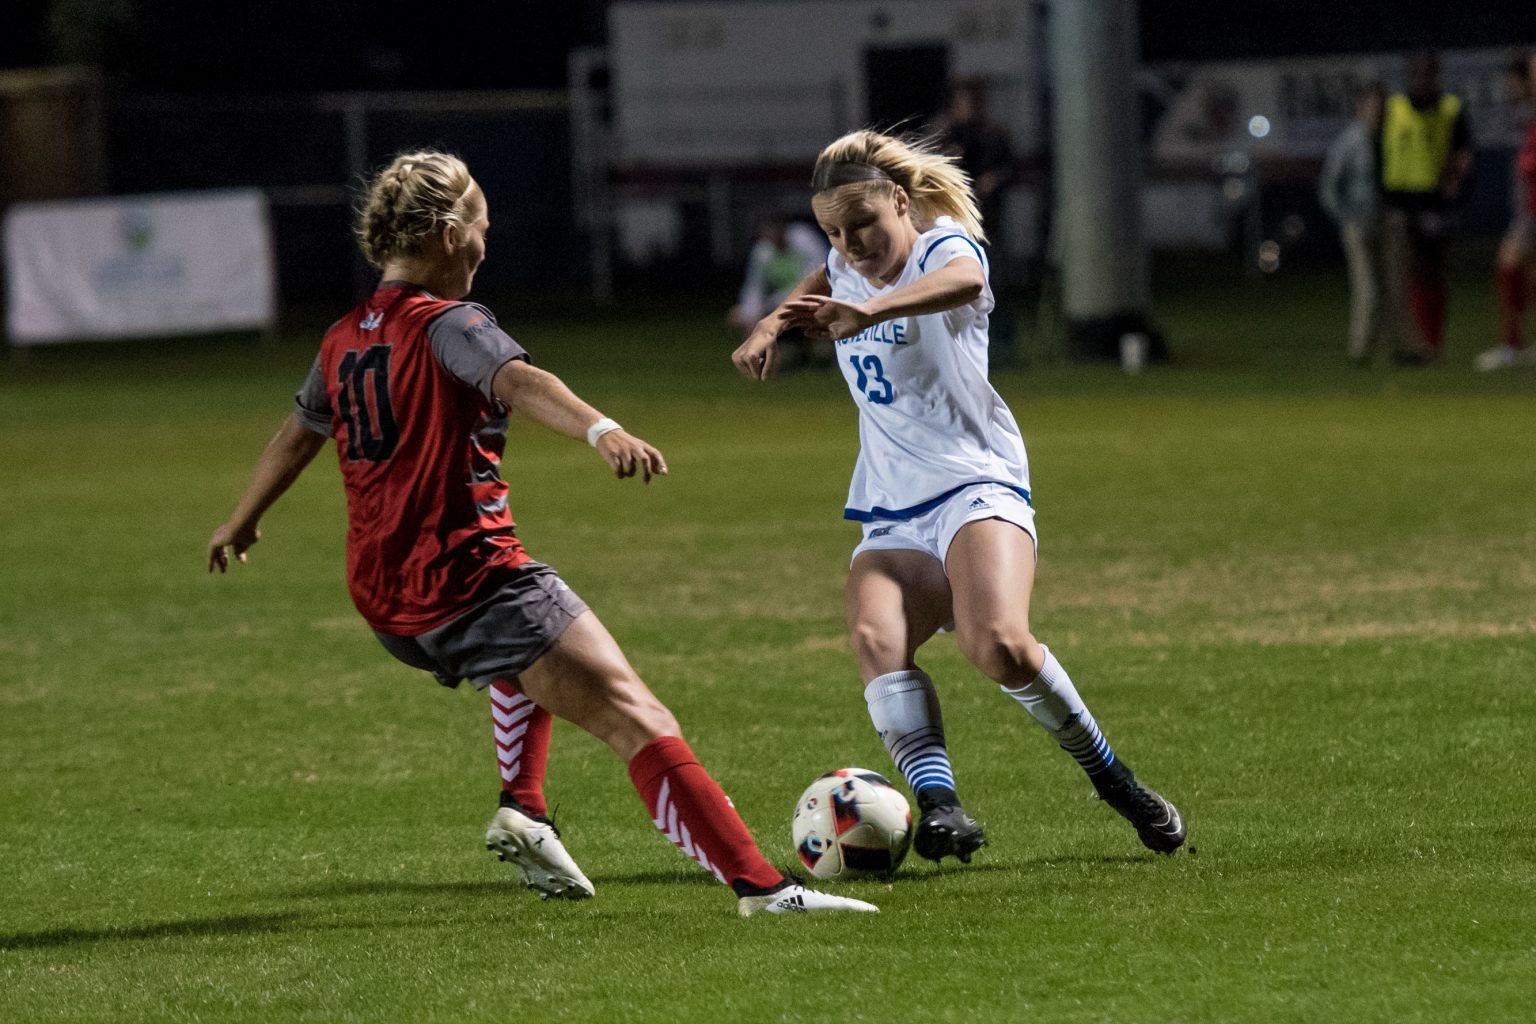 Midfielder Gretchen Dettlinger said the Bulldogs worked the ball up the field effectively but could not score. Photo courtesy of Adrian Etheridge.